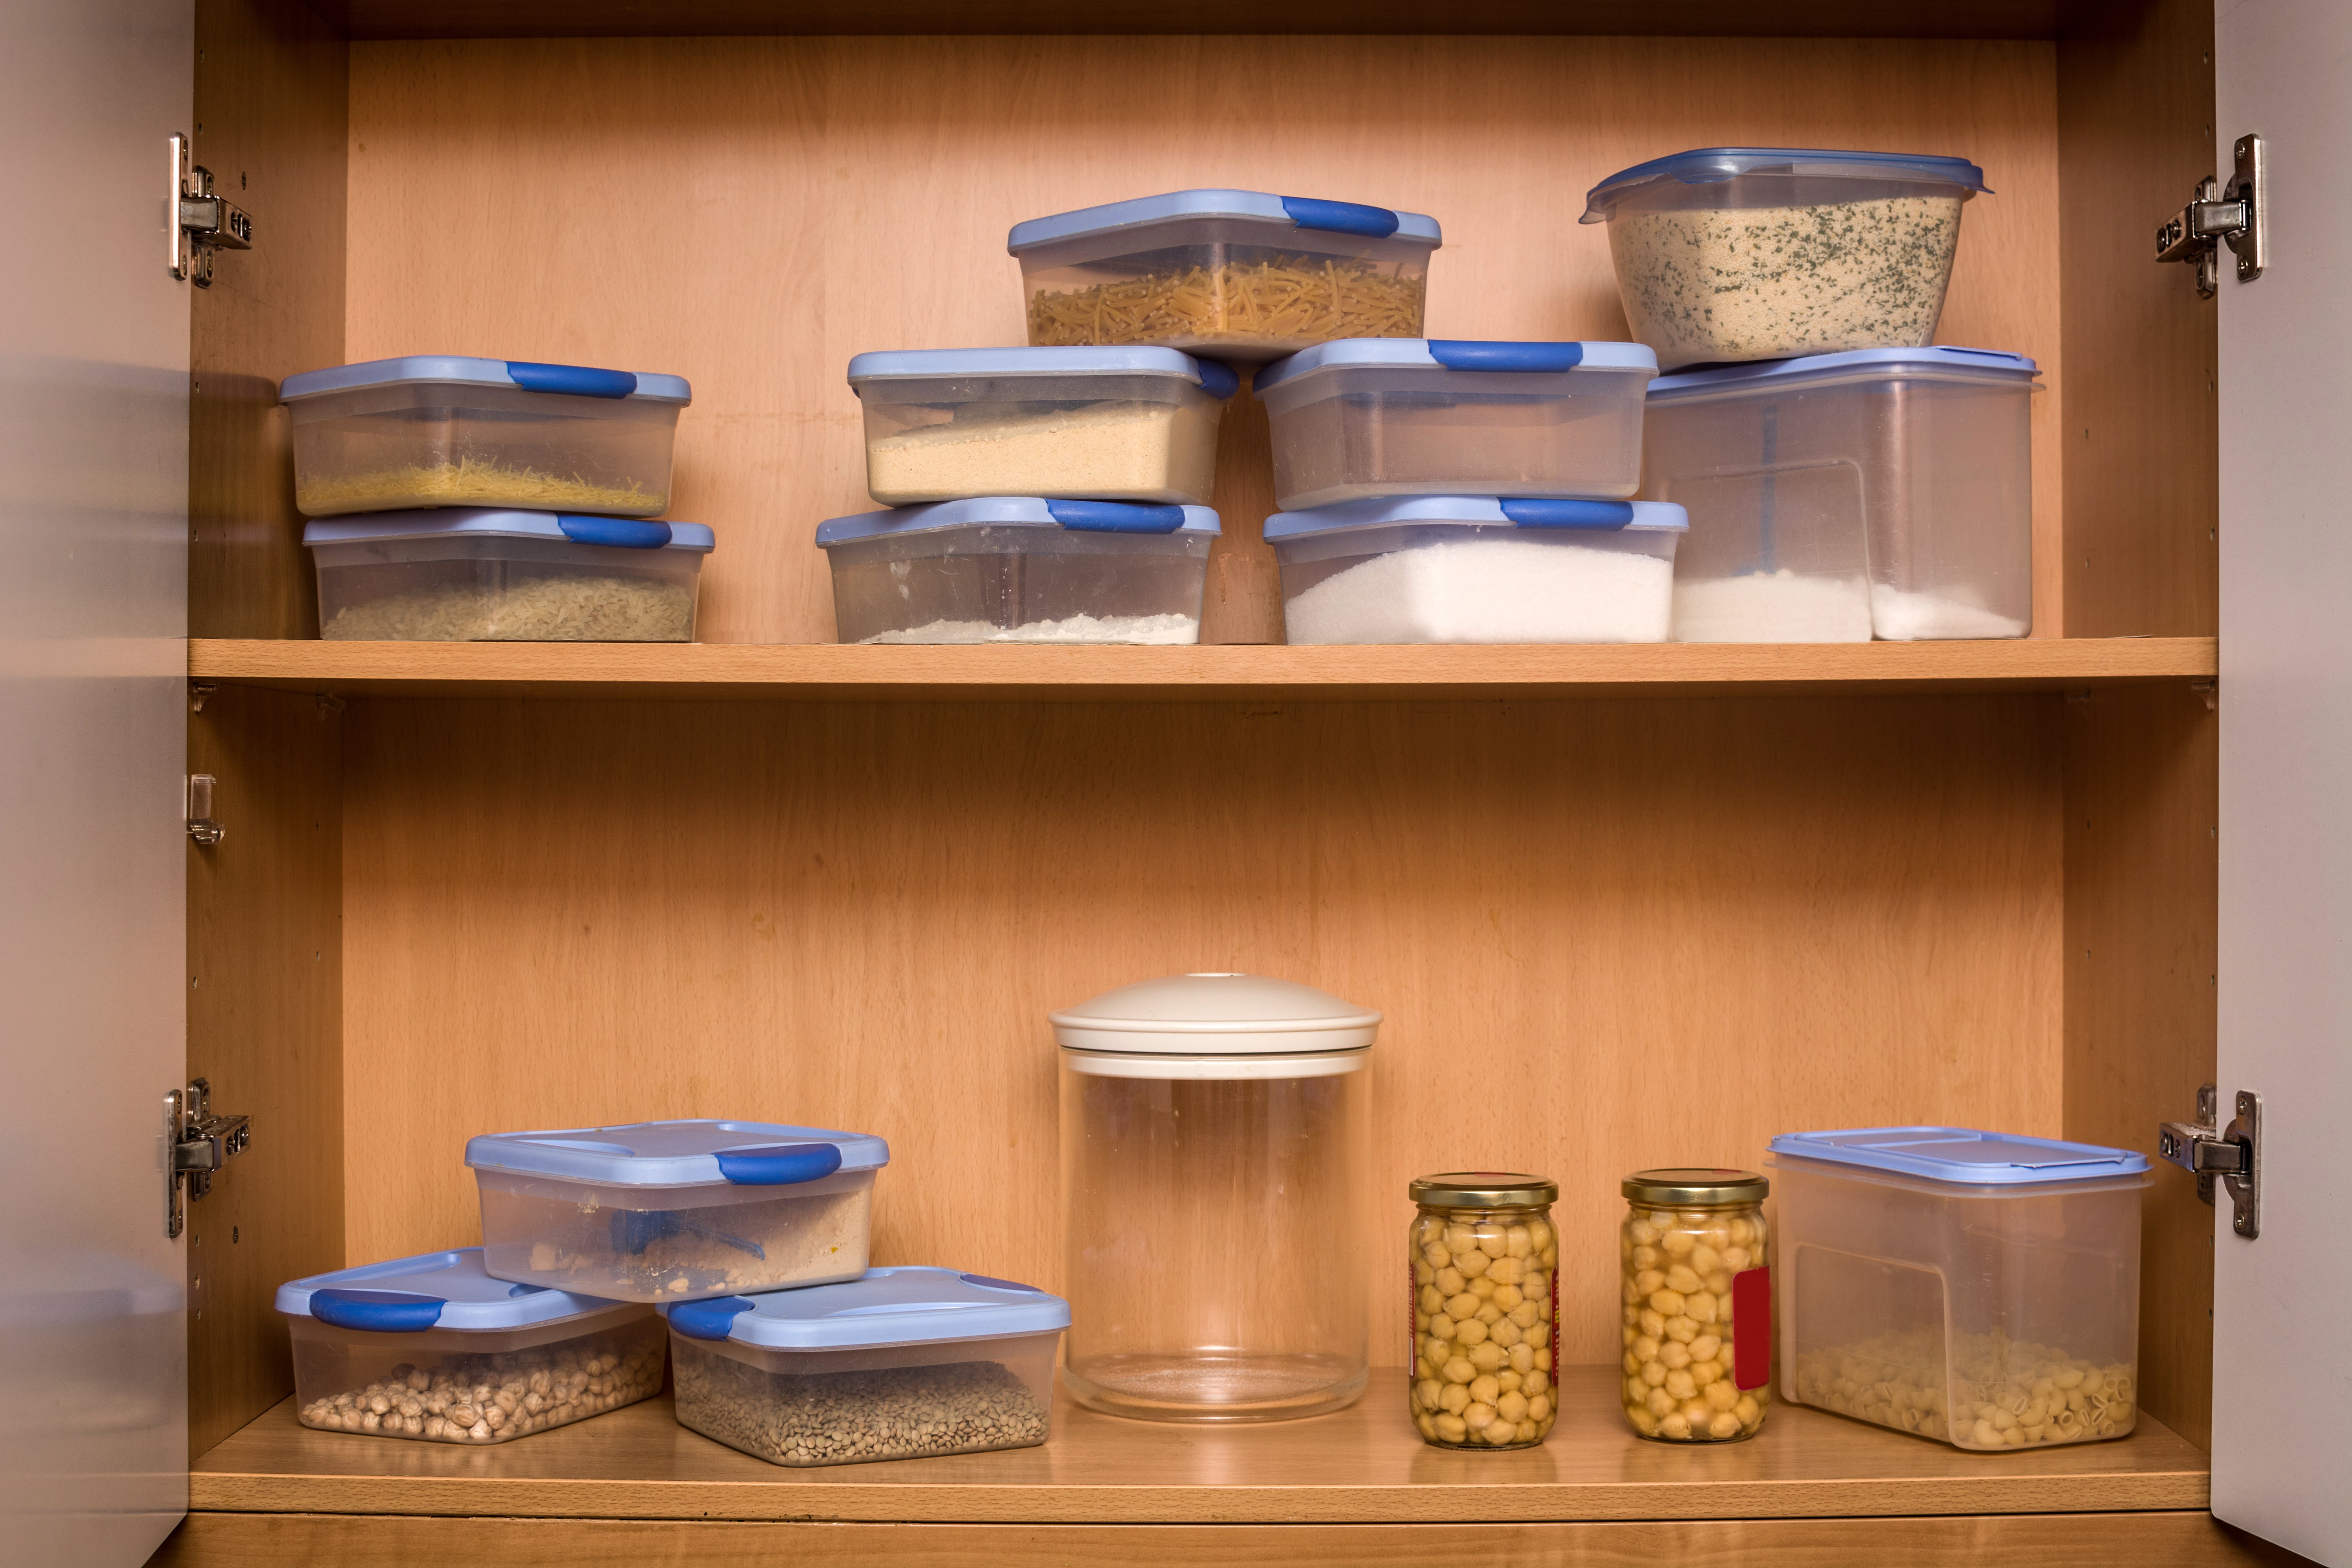 4 Quick Steps To Organize Your Tupperware Drawer - Small Stuff Counts